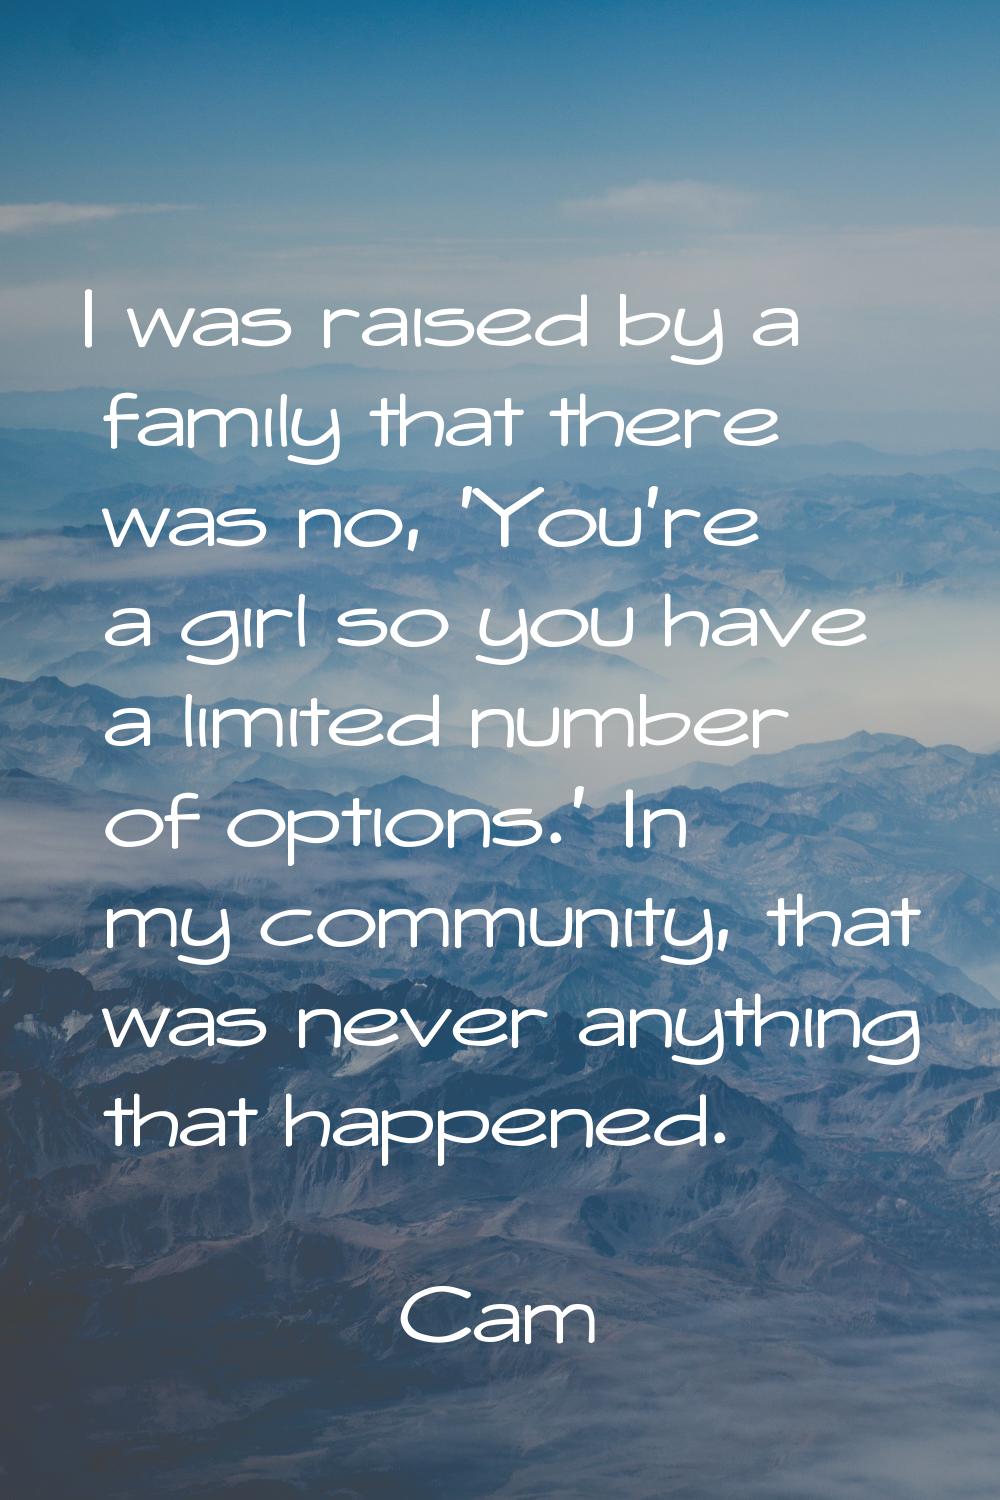 I was raised by a family that there was no, 'You're a girl so you have a limited number of options.